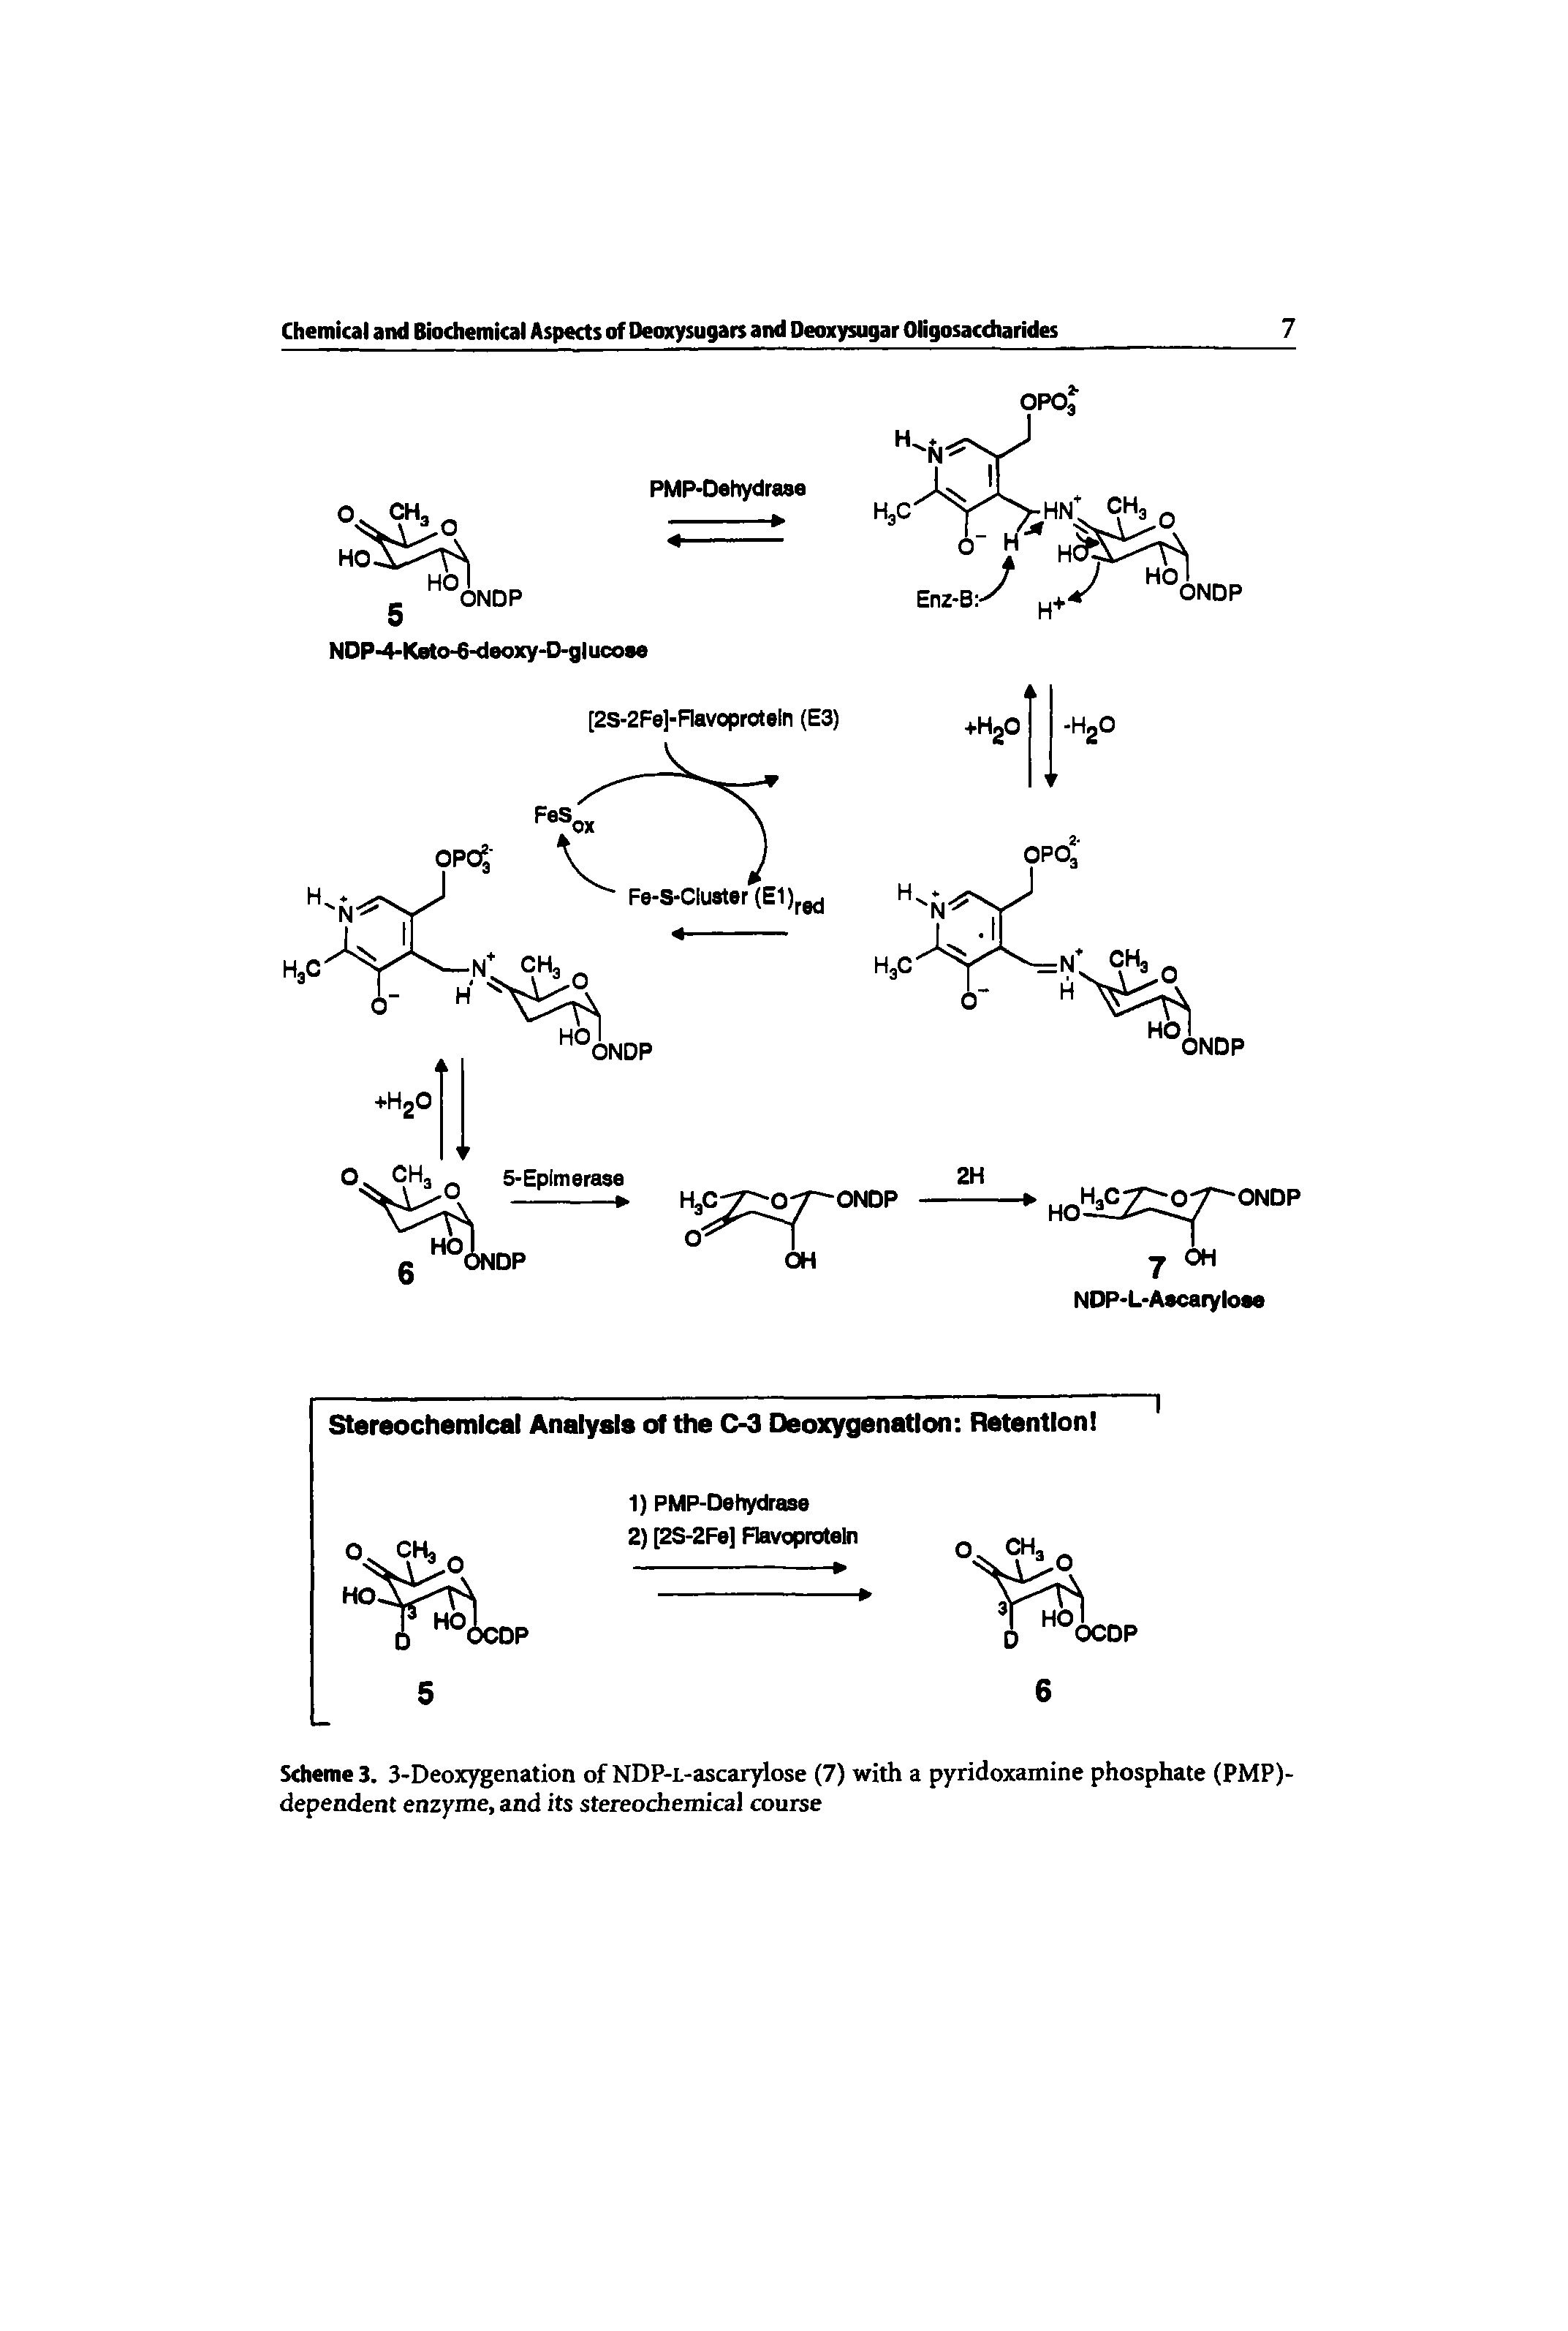 Scheme 3. 3-Deoxygenation of NDP-L-ascarylose (7) with a pyridoxamine phosphate (PMP)-dependent enzyme, and its stereochemical course...